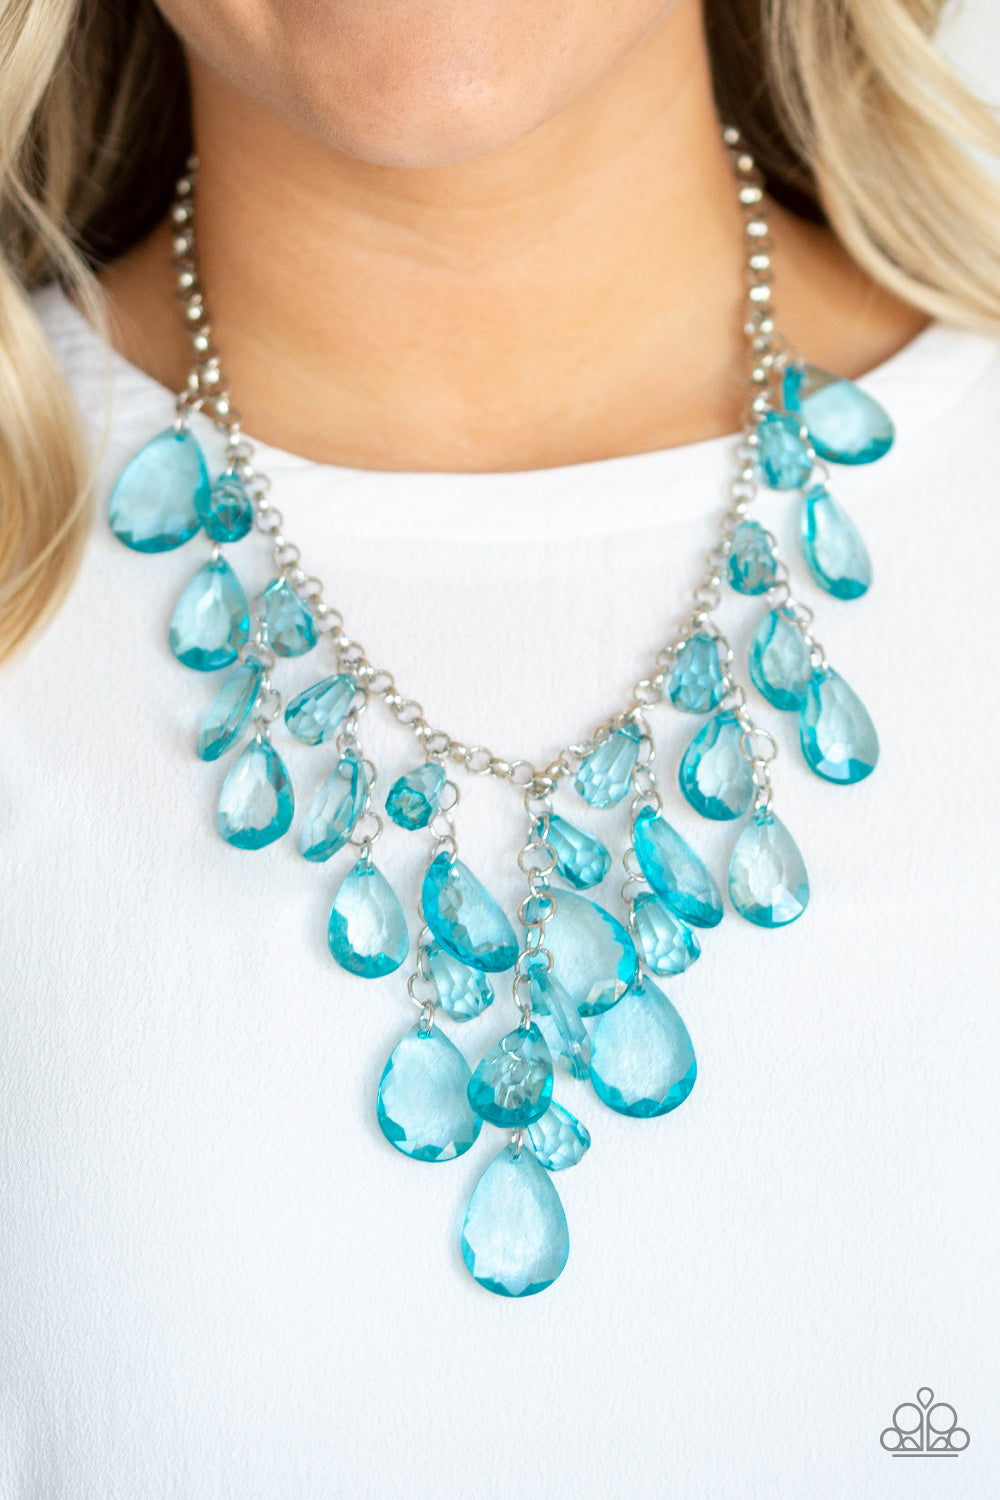 Irresistible Iridescence - Blue Necklace 1195N